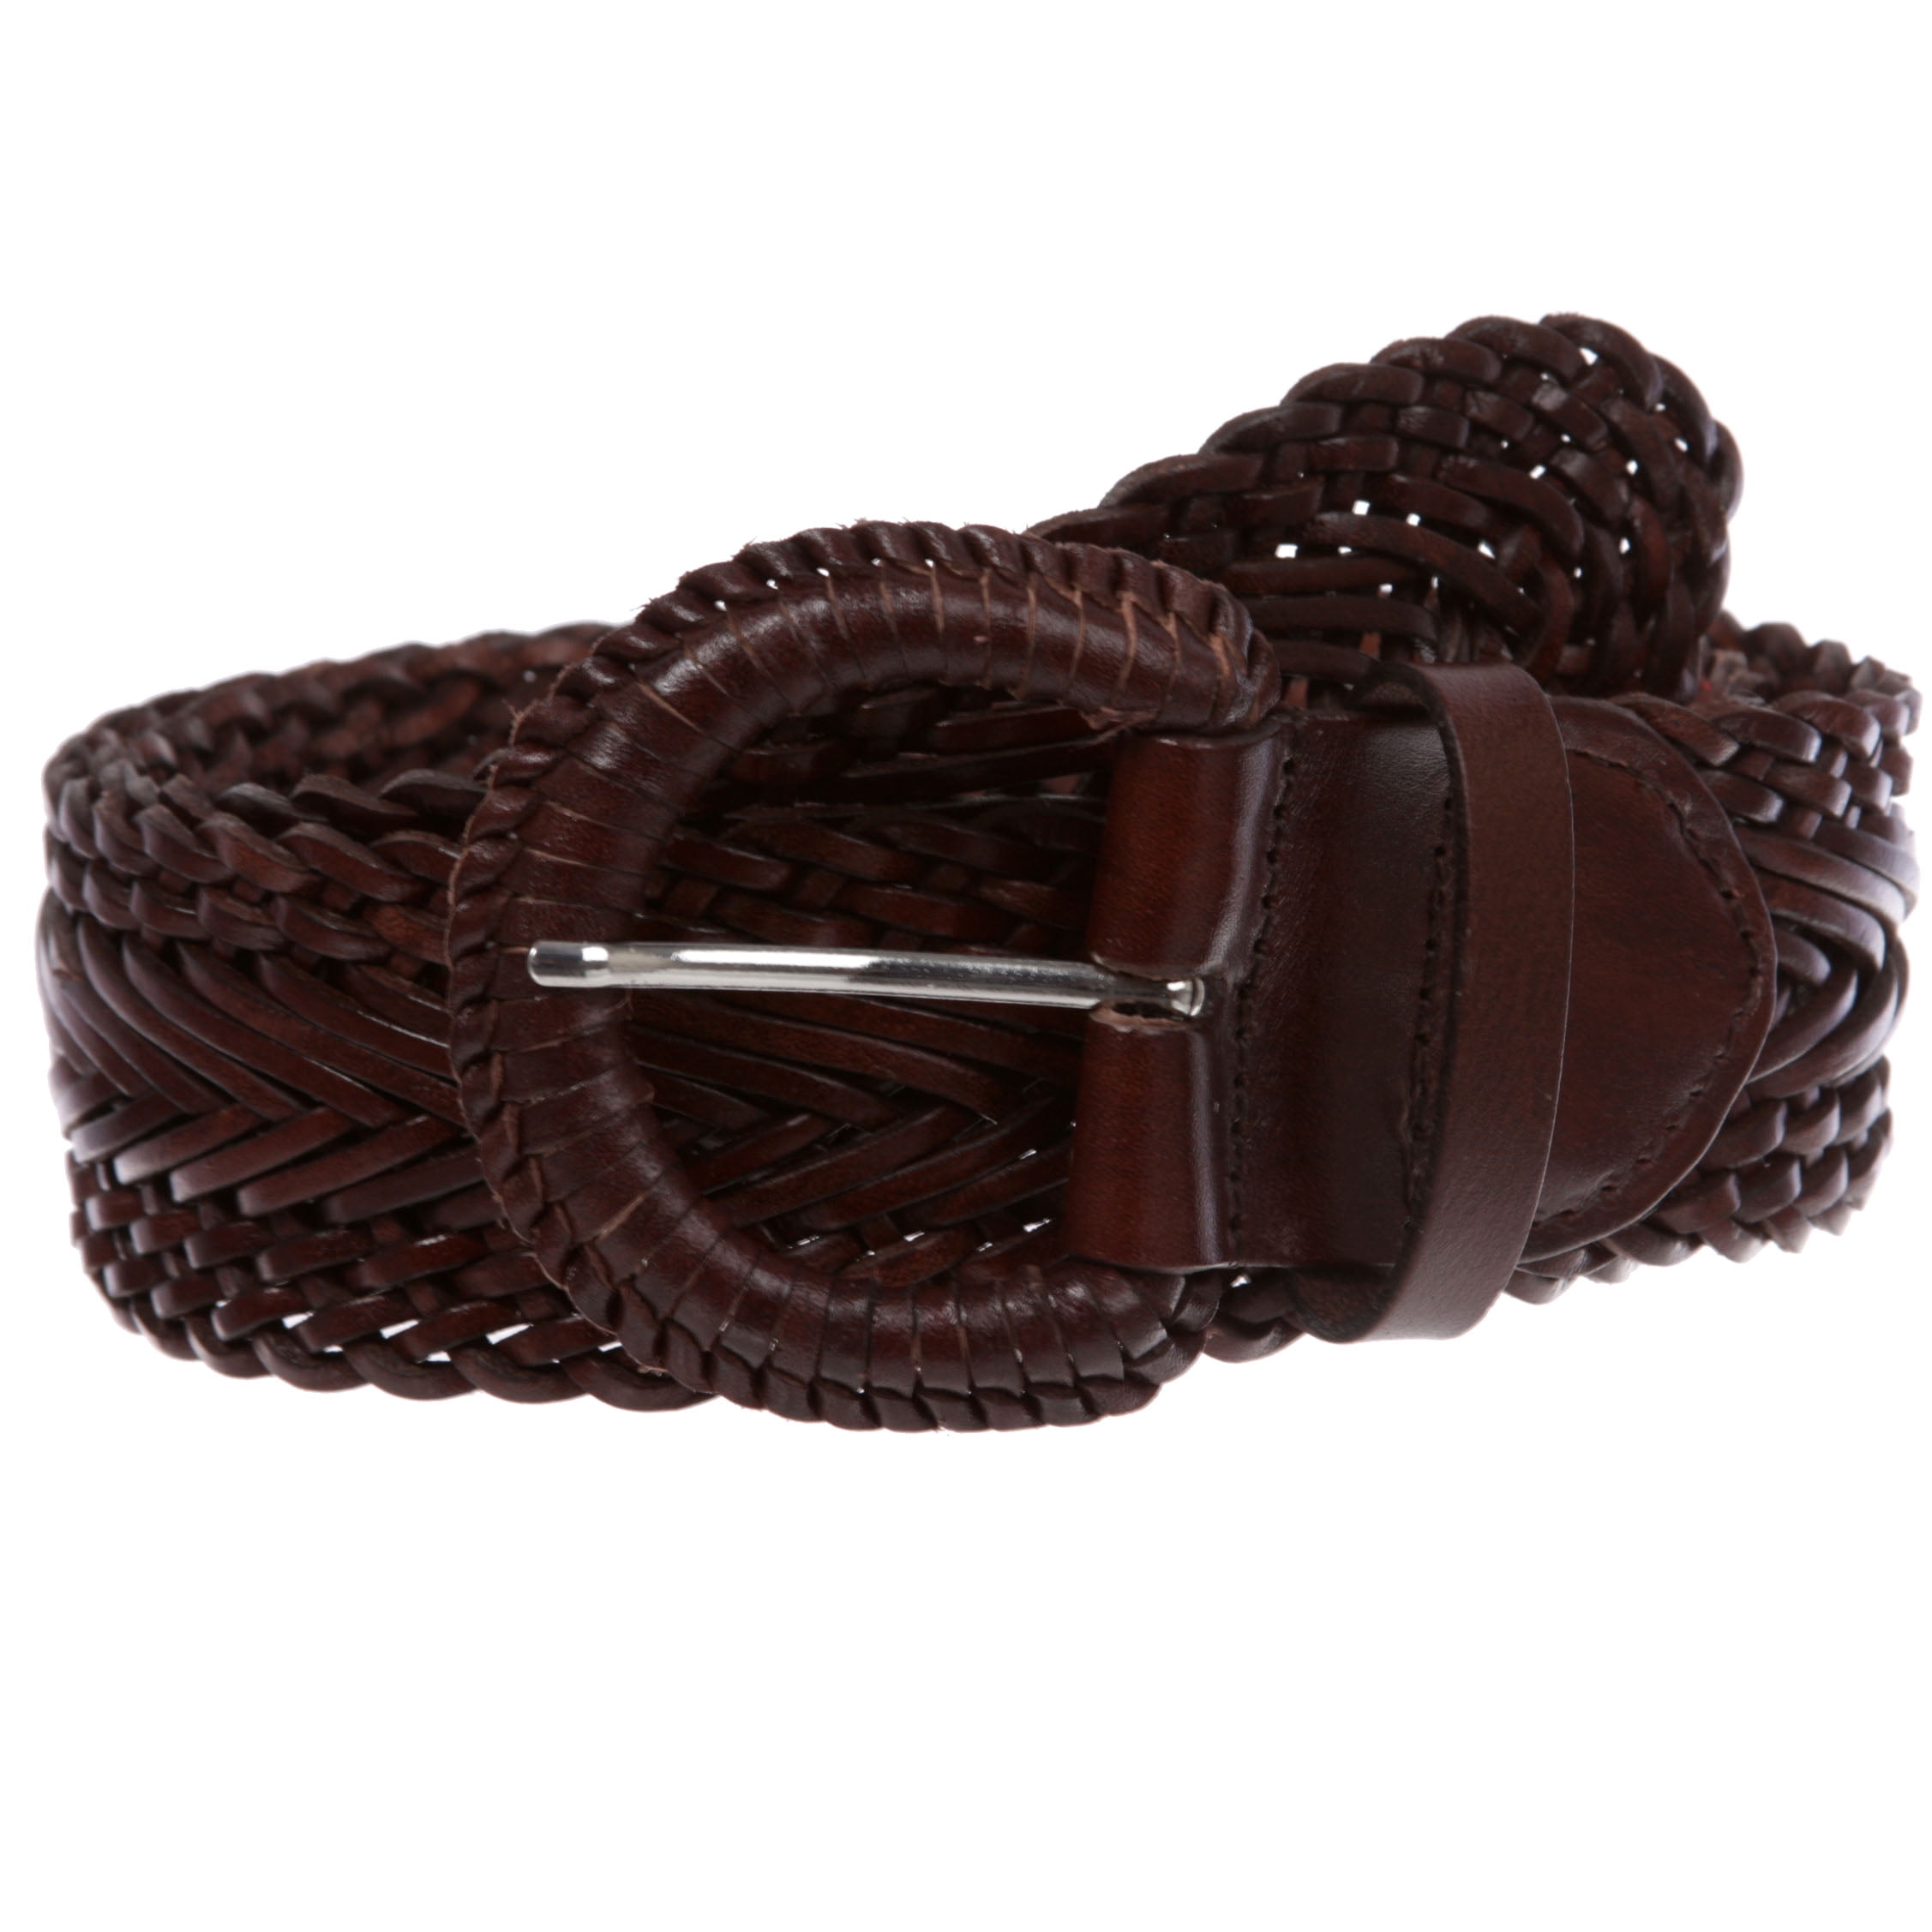 JasGood Mens Fashion Vintage Perforated Casual Braid-Weave Belt With Classic Buckle 